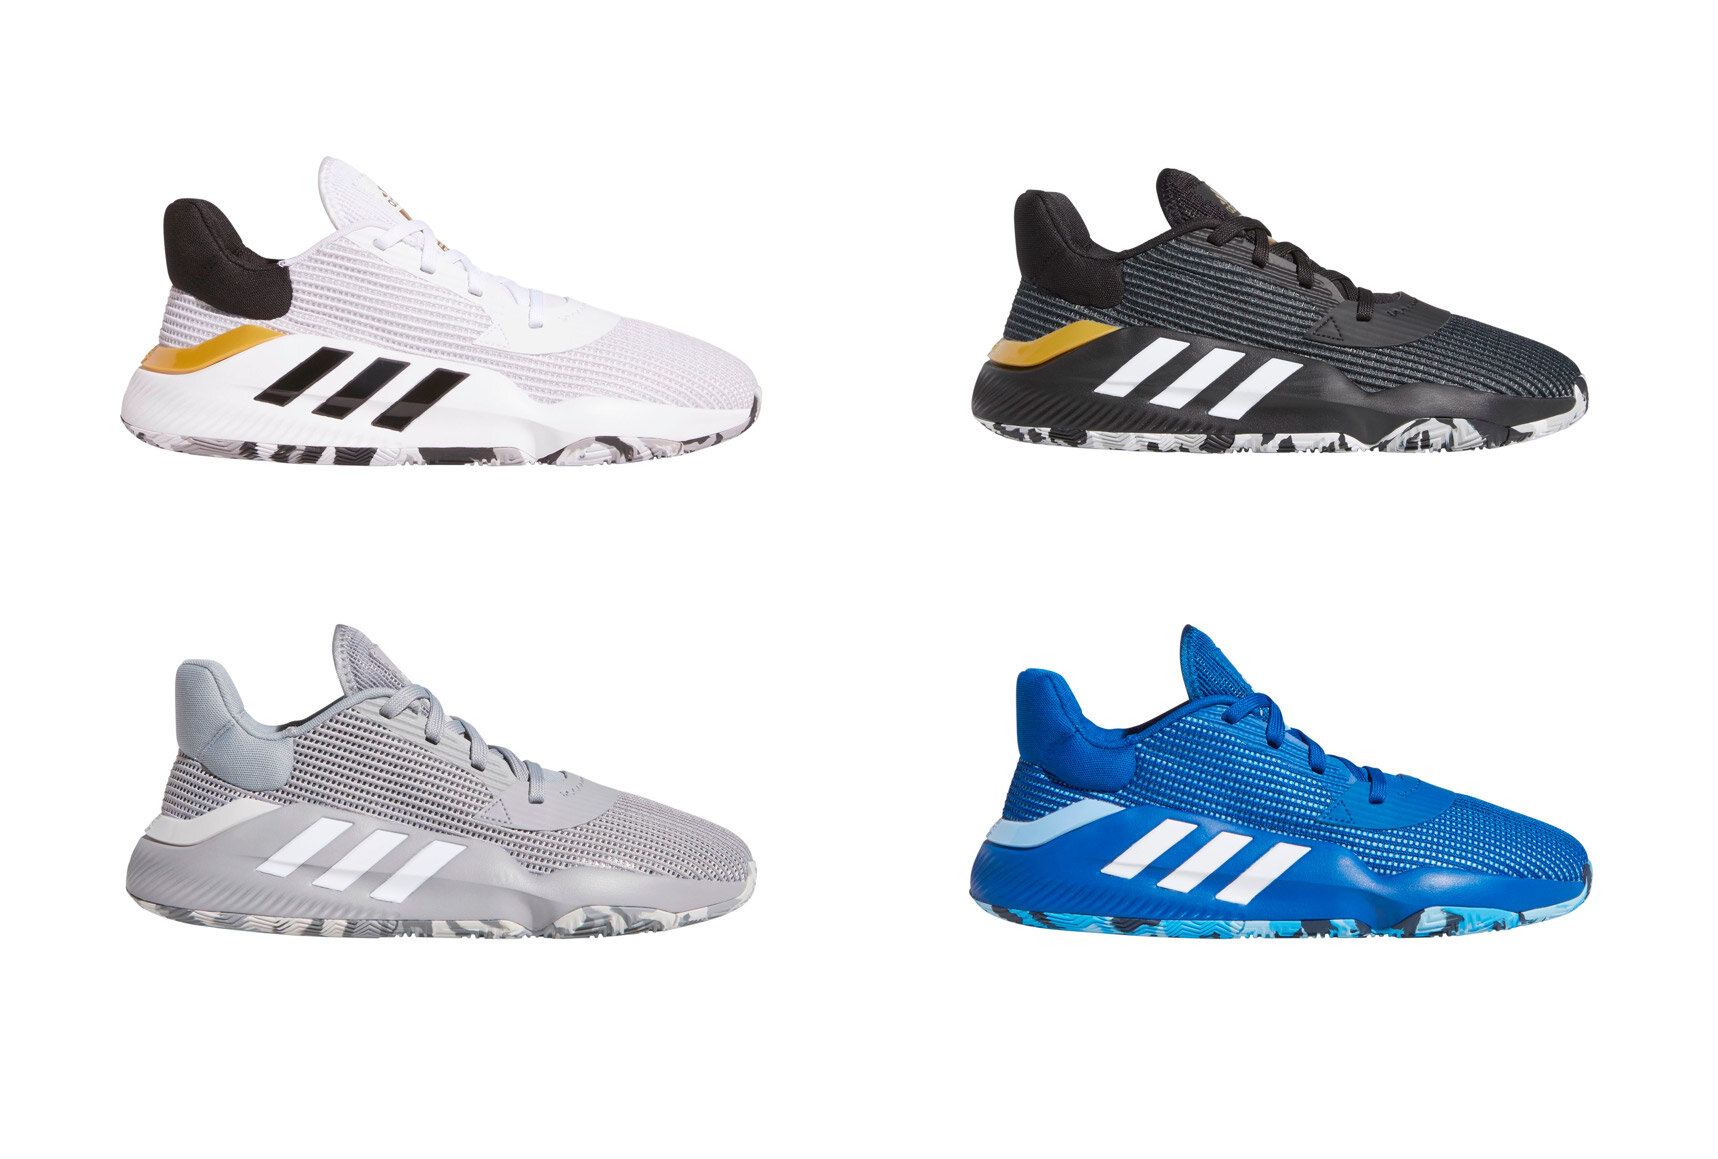 adidas pro bounce 2019 low blue